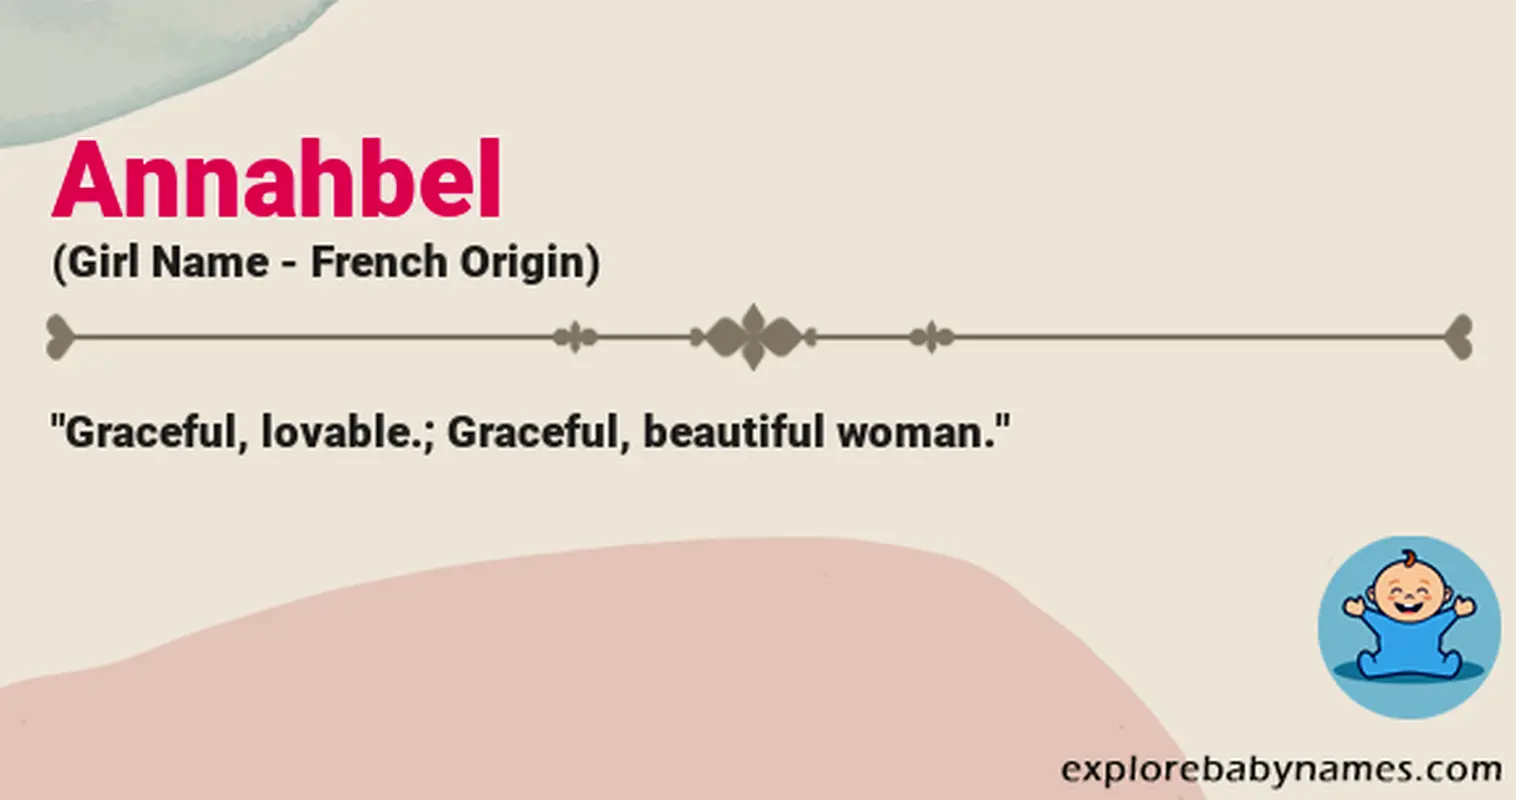 Meaning of Annahbel